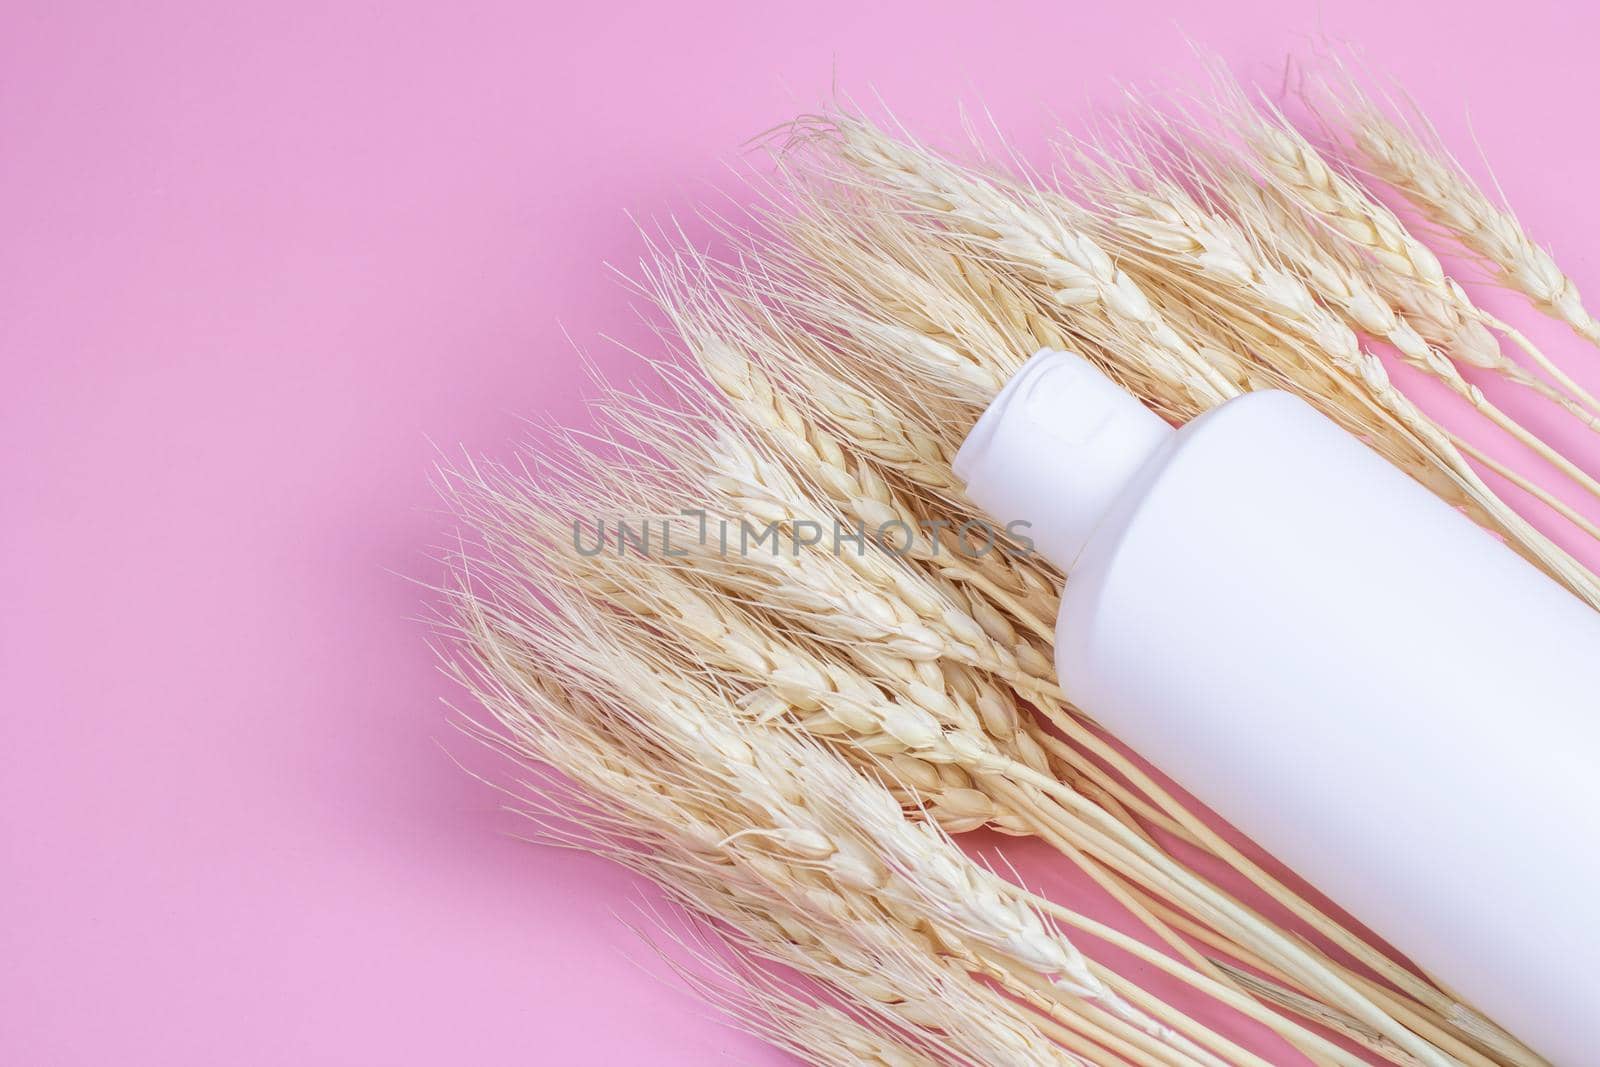 Blank cosmetics container and wheat ears on pink background. Cream or shampoo bottle mockup. Organic beauty product.